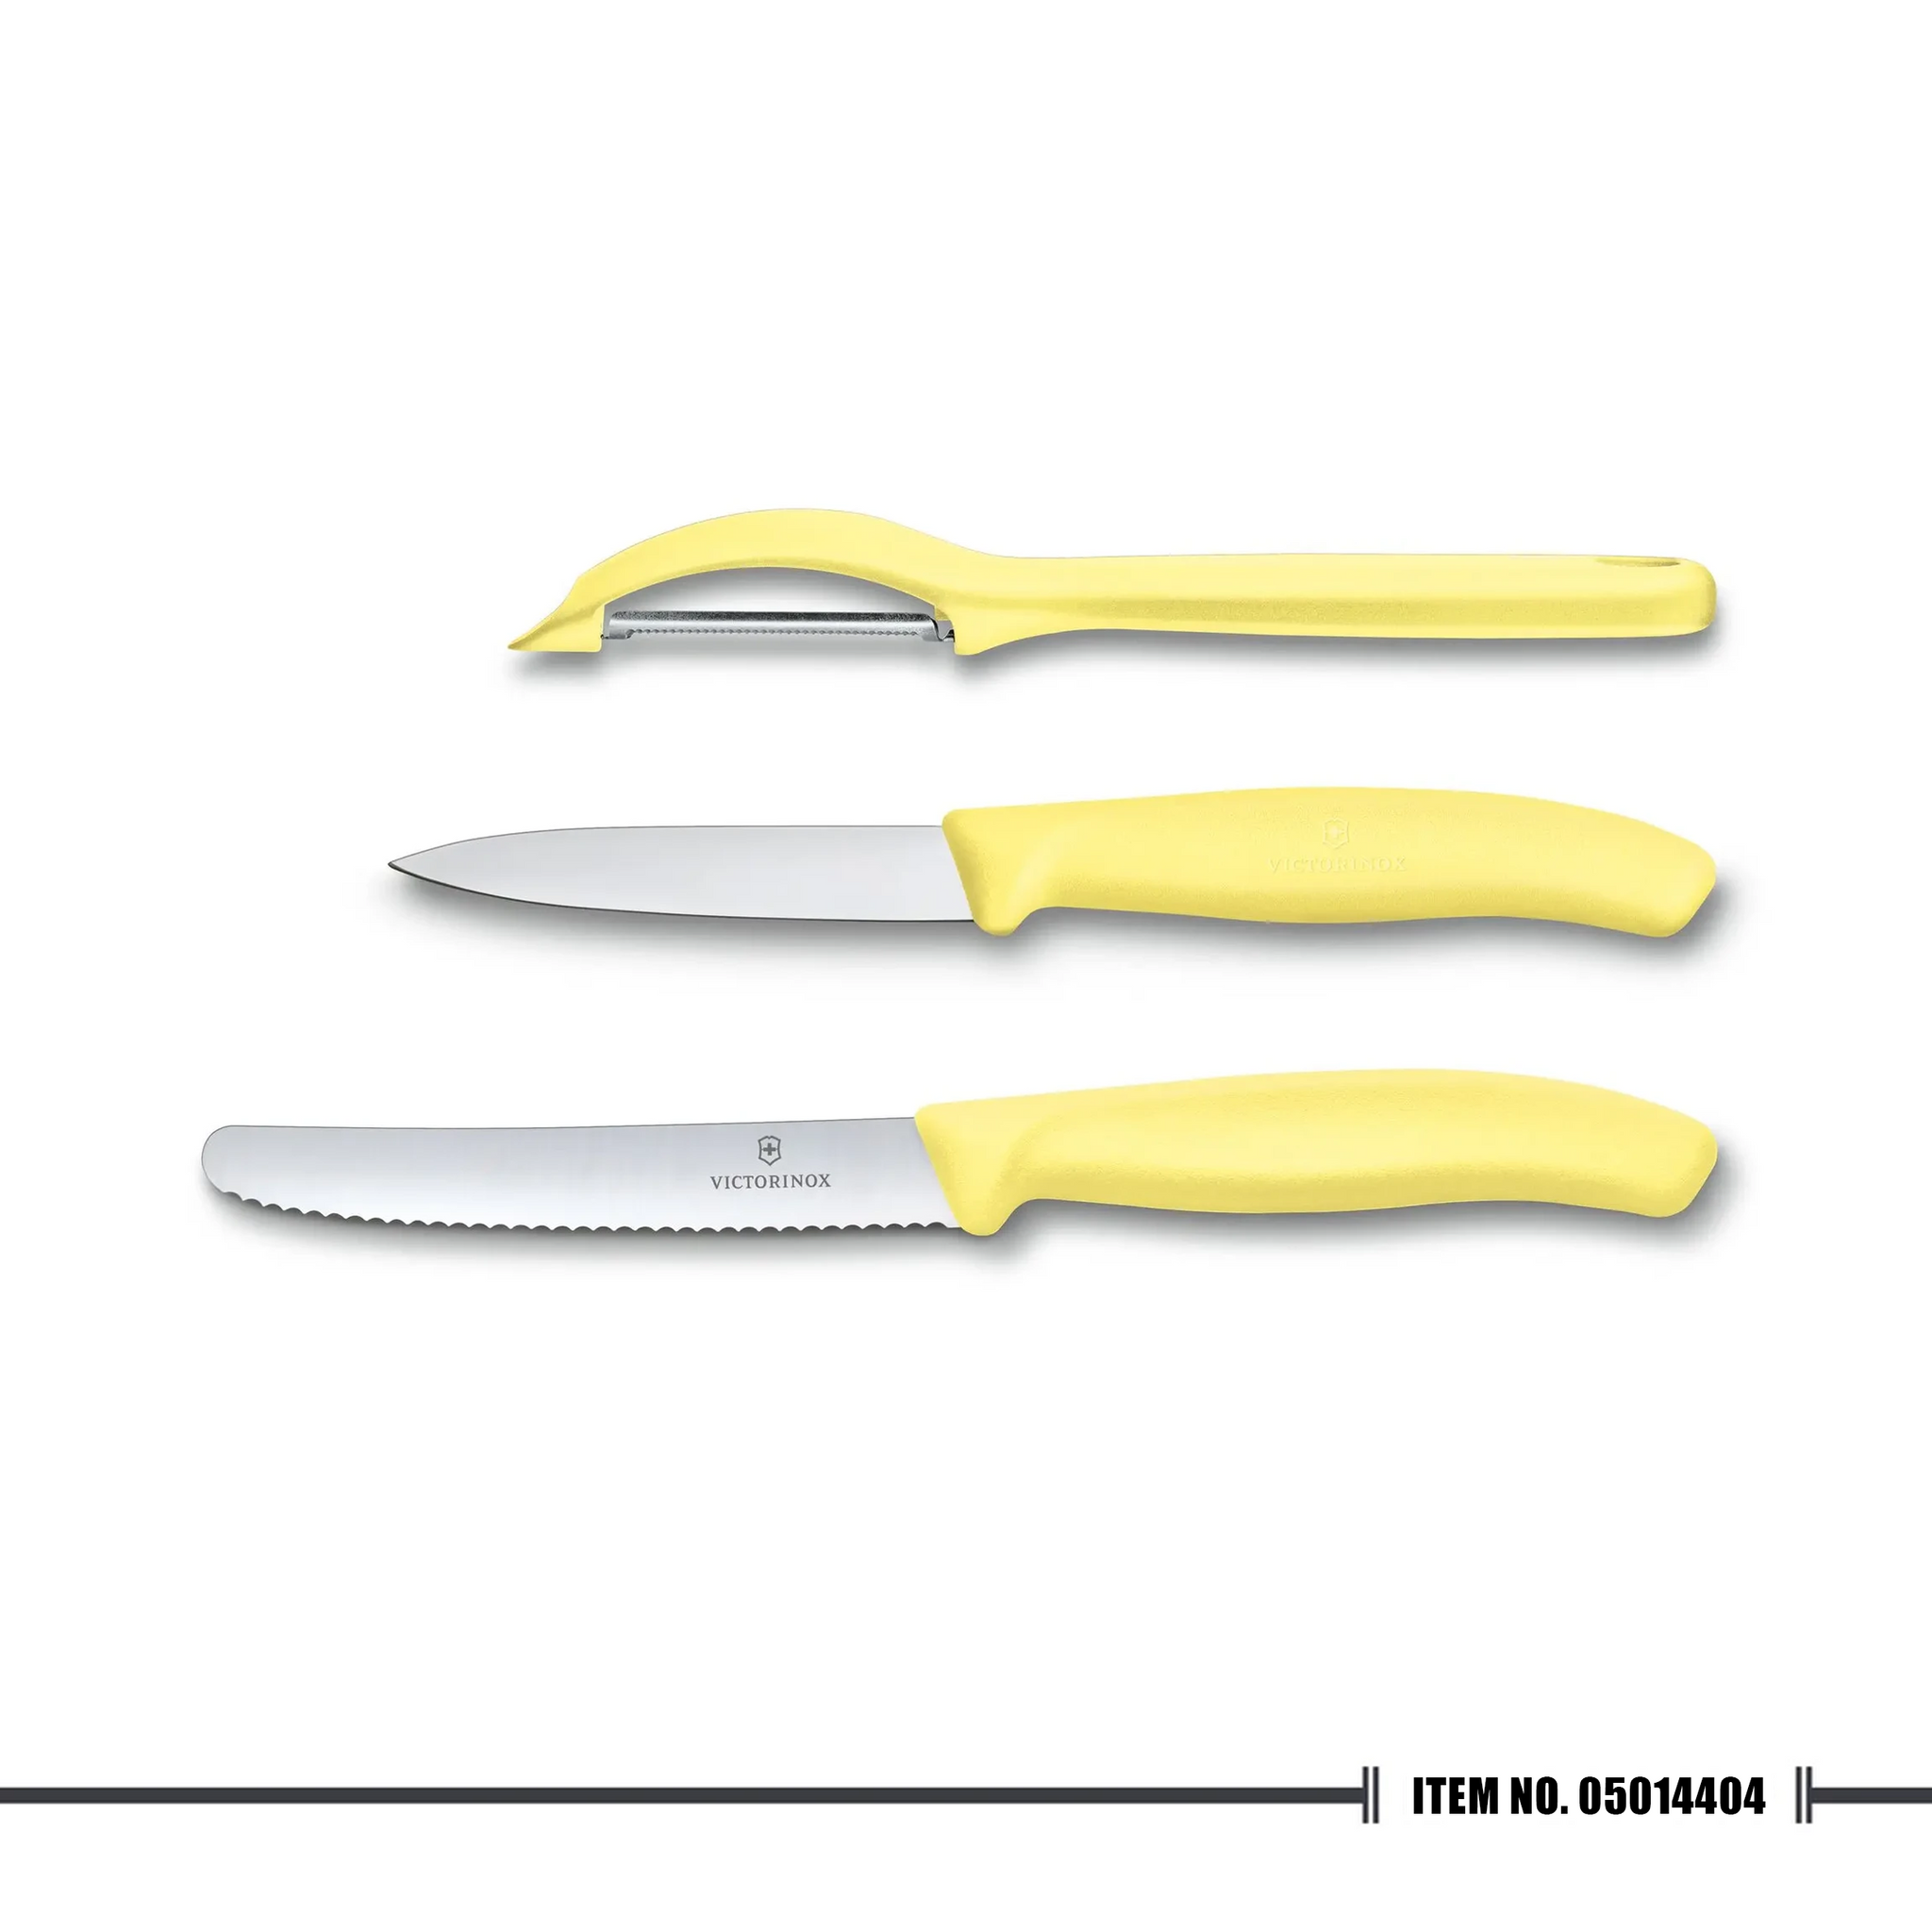 Victorinox Swiss Classic Trend Colors Paring Knife Set with Universal Peeler, 3 Pieces